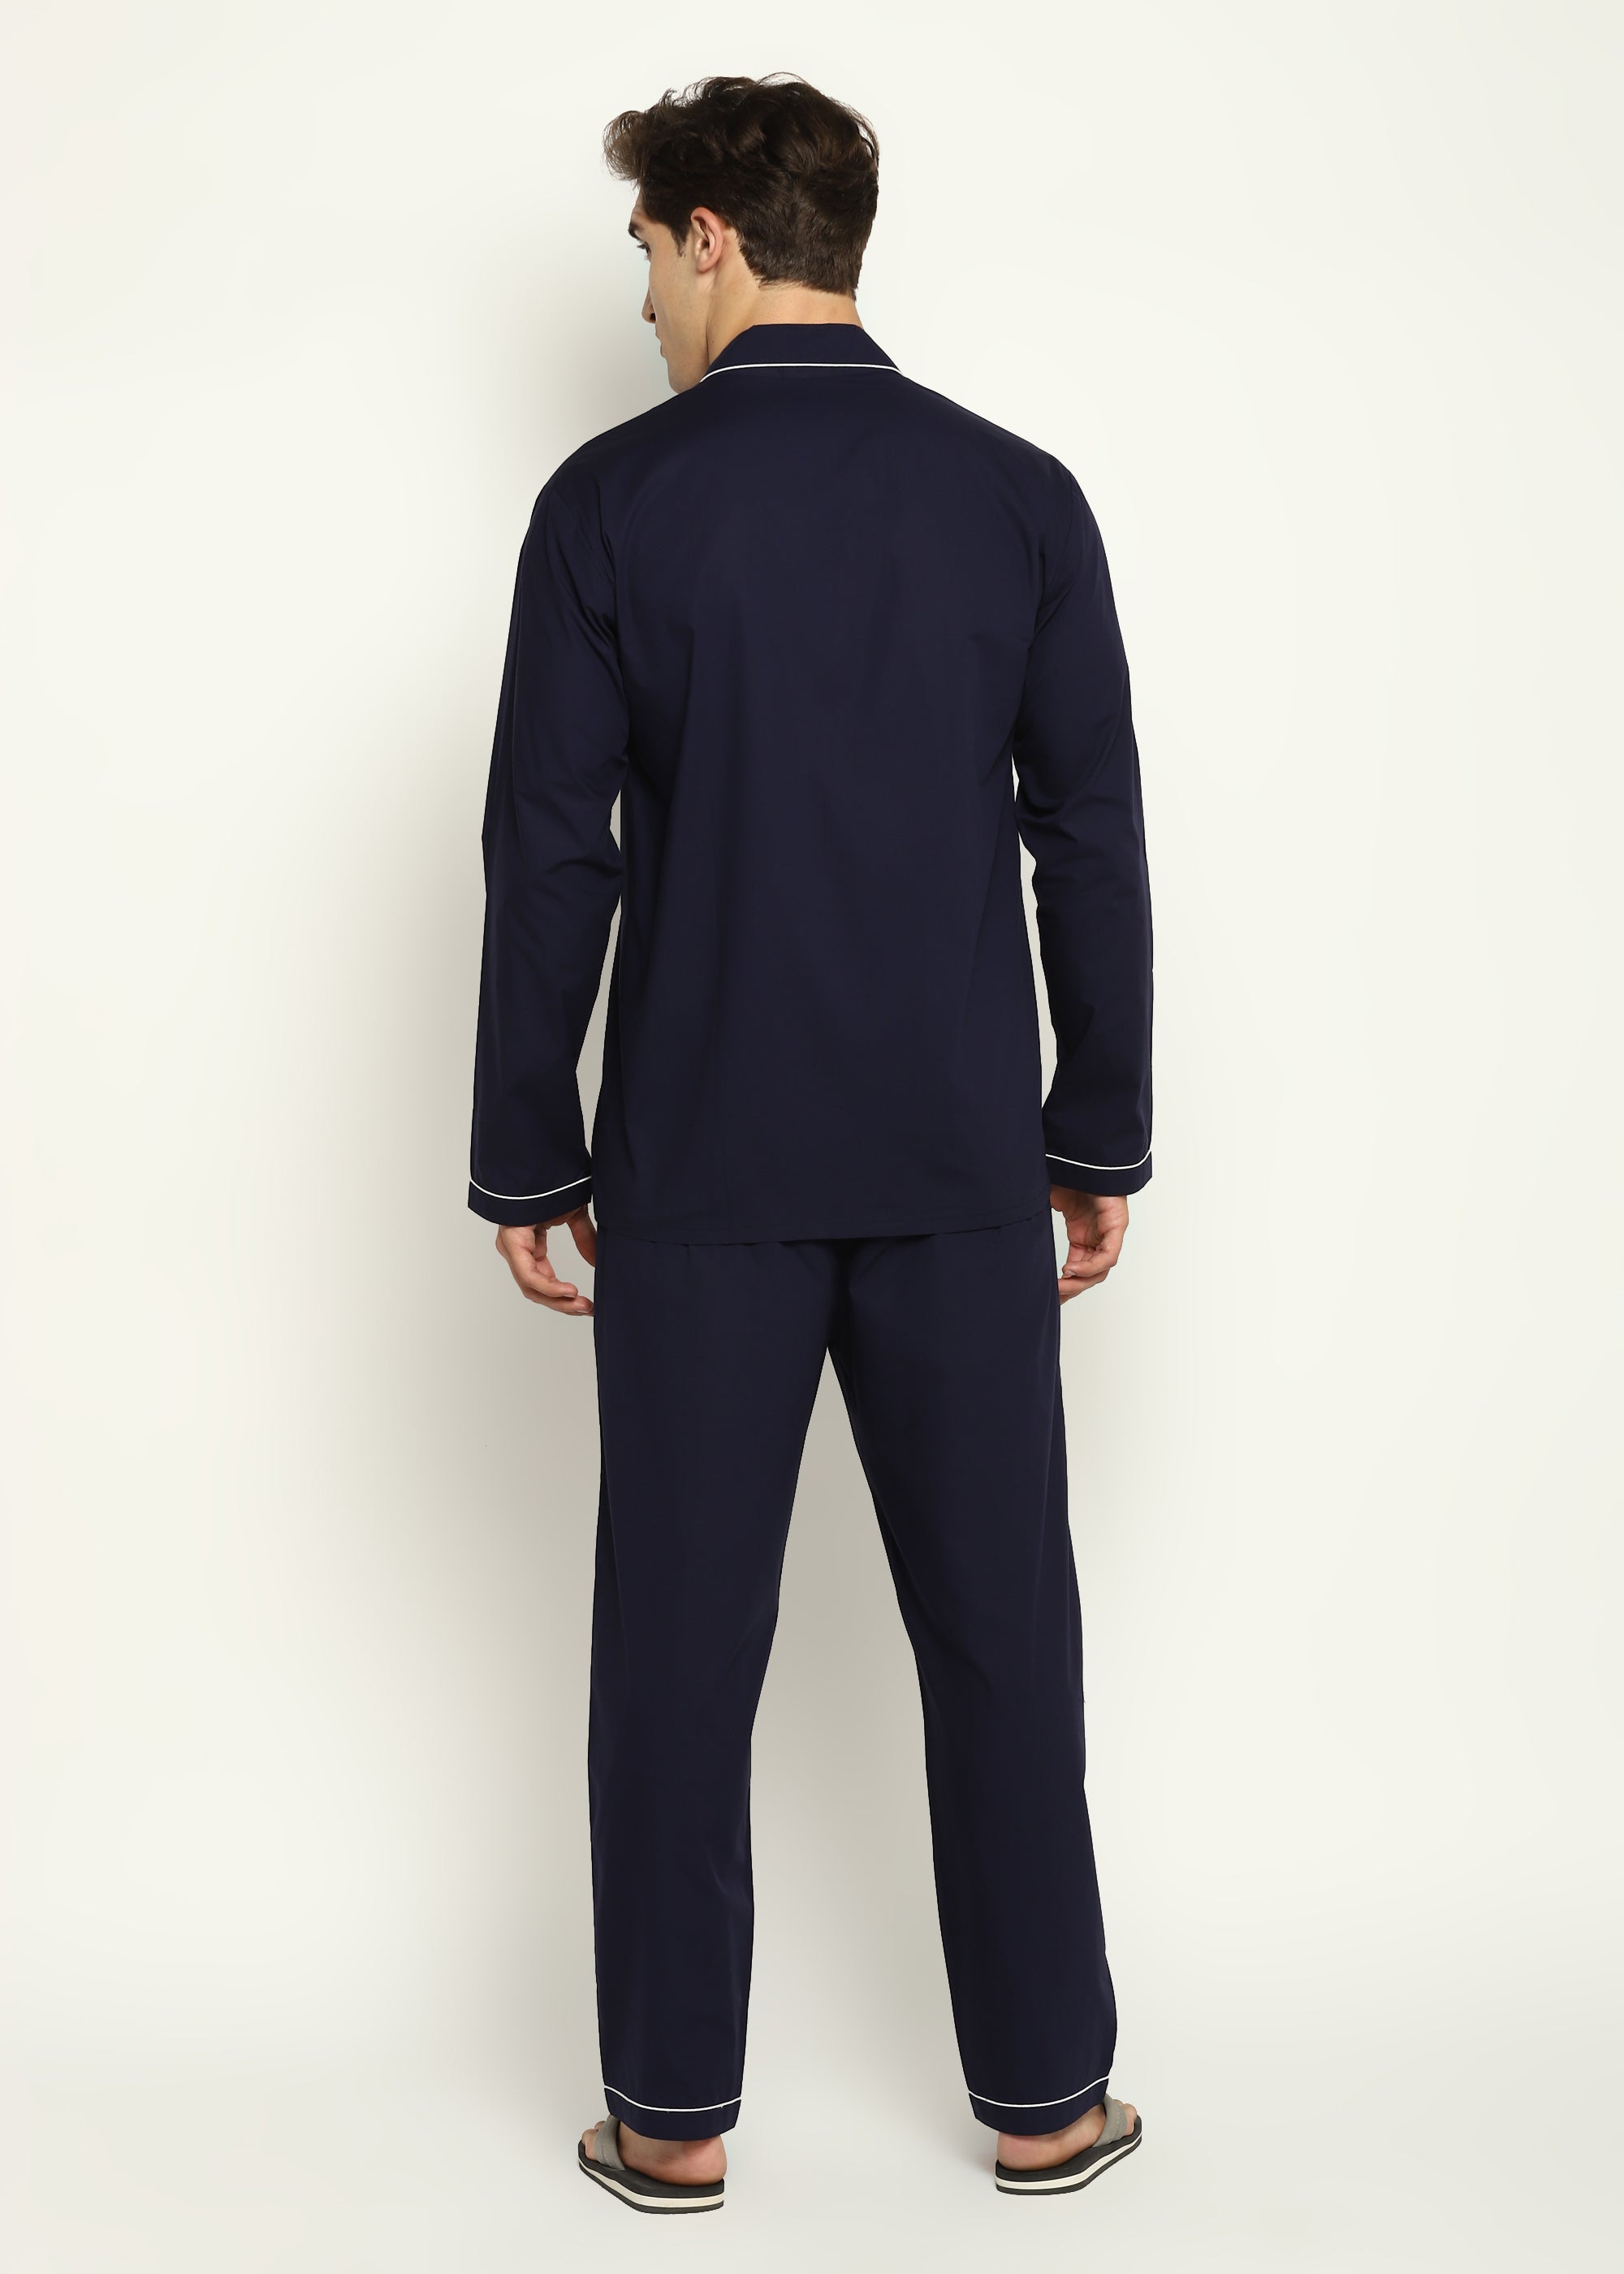 Navy Cotton with White Piping Men's Night Suit - Shopbloom